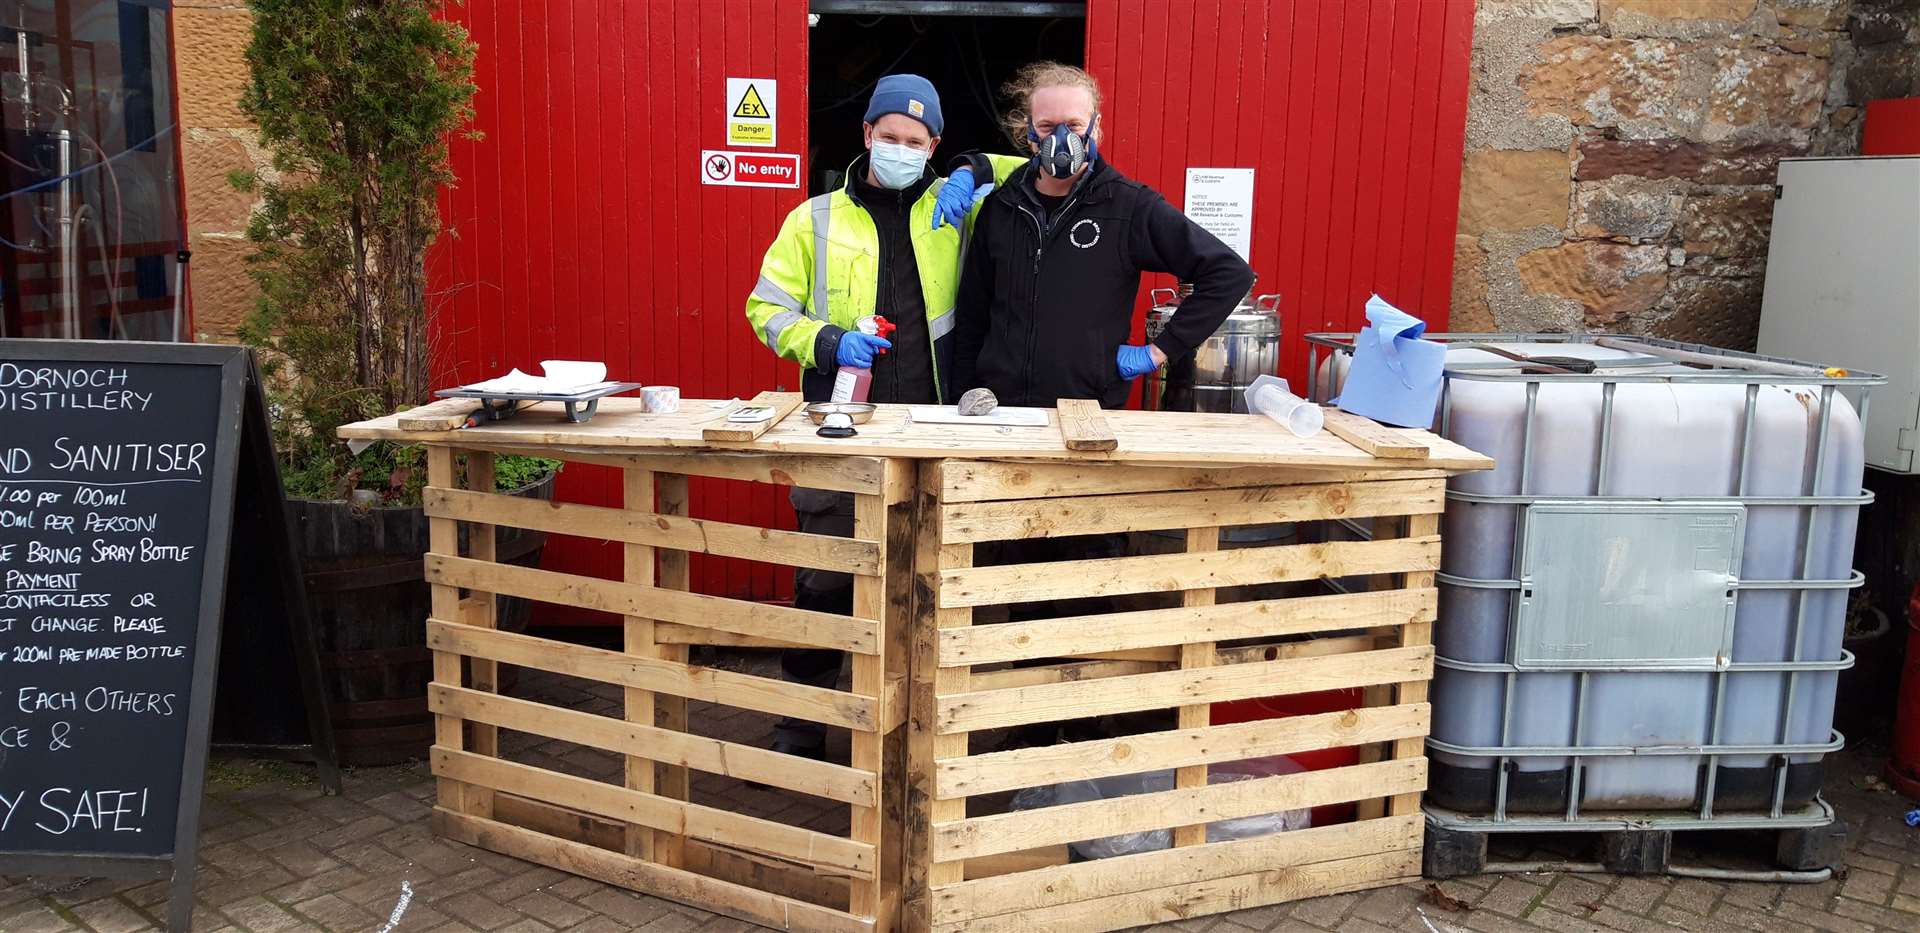 Simon Thompson (right) and brother Philip, operators of Dornoch Distillery, sell hand sanitiser from an outdoor stall.